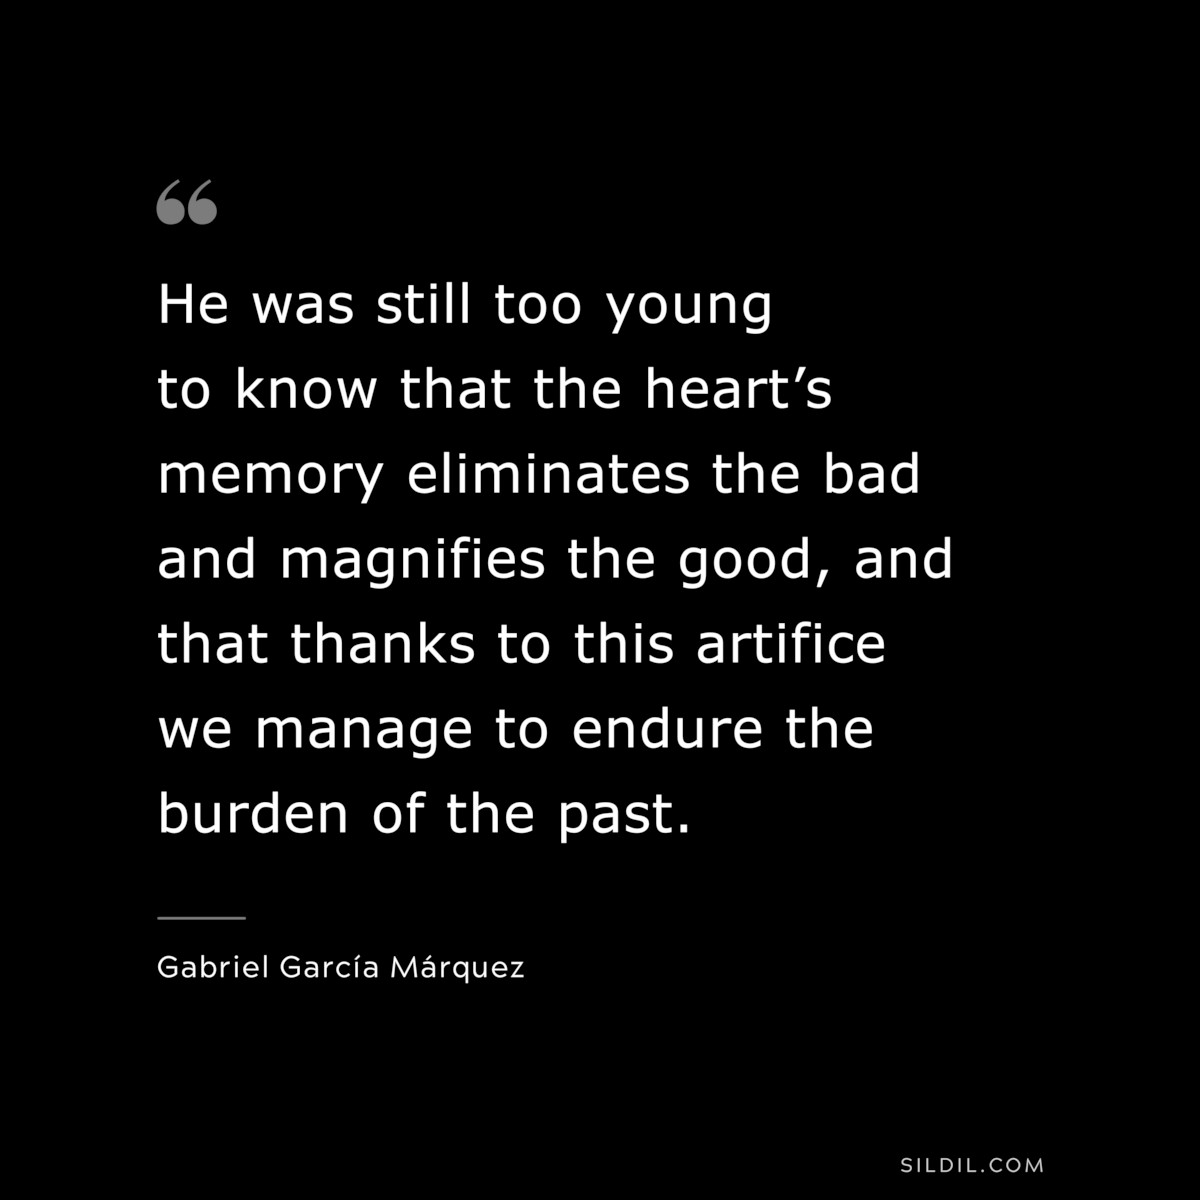 He was still too young to know that the heart’s memory eliminates the bad and magnifies the good, and that thanks to this artifice we manage to endure the burden of the past. ― Gabriel García Márquez